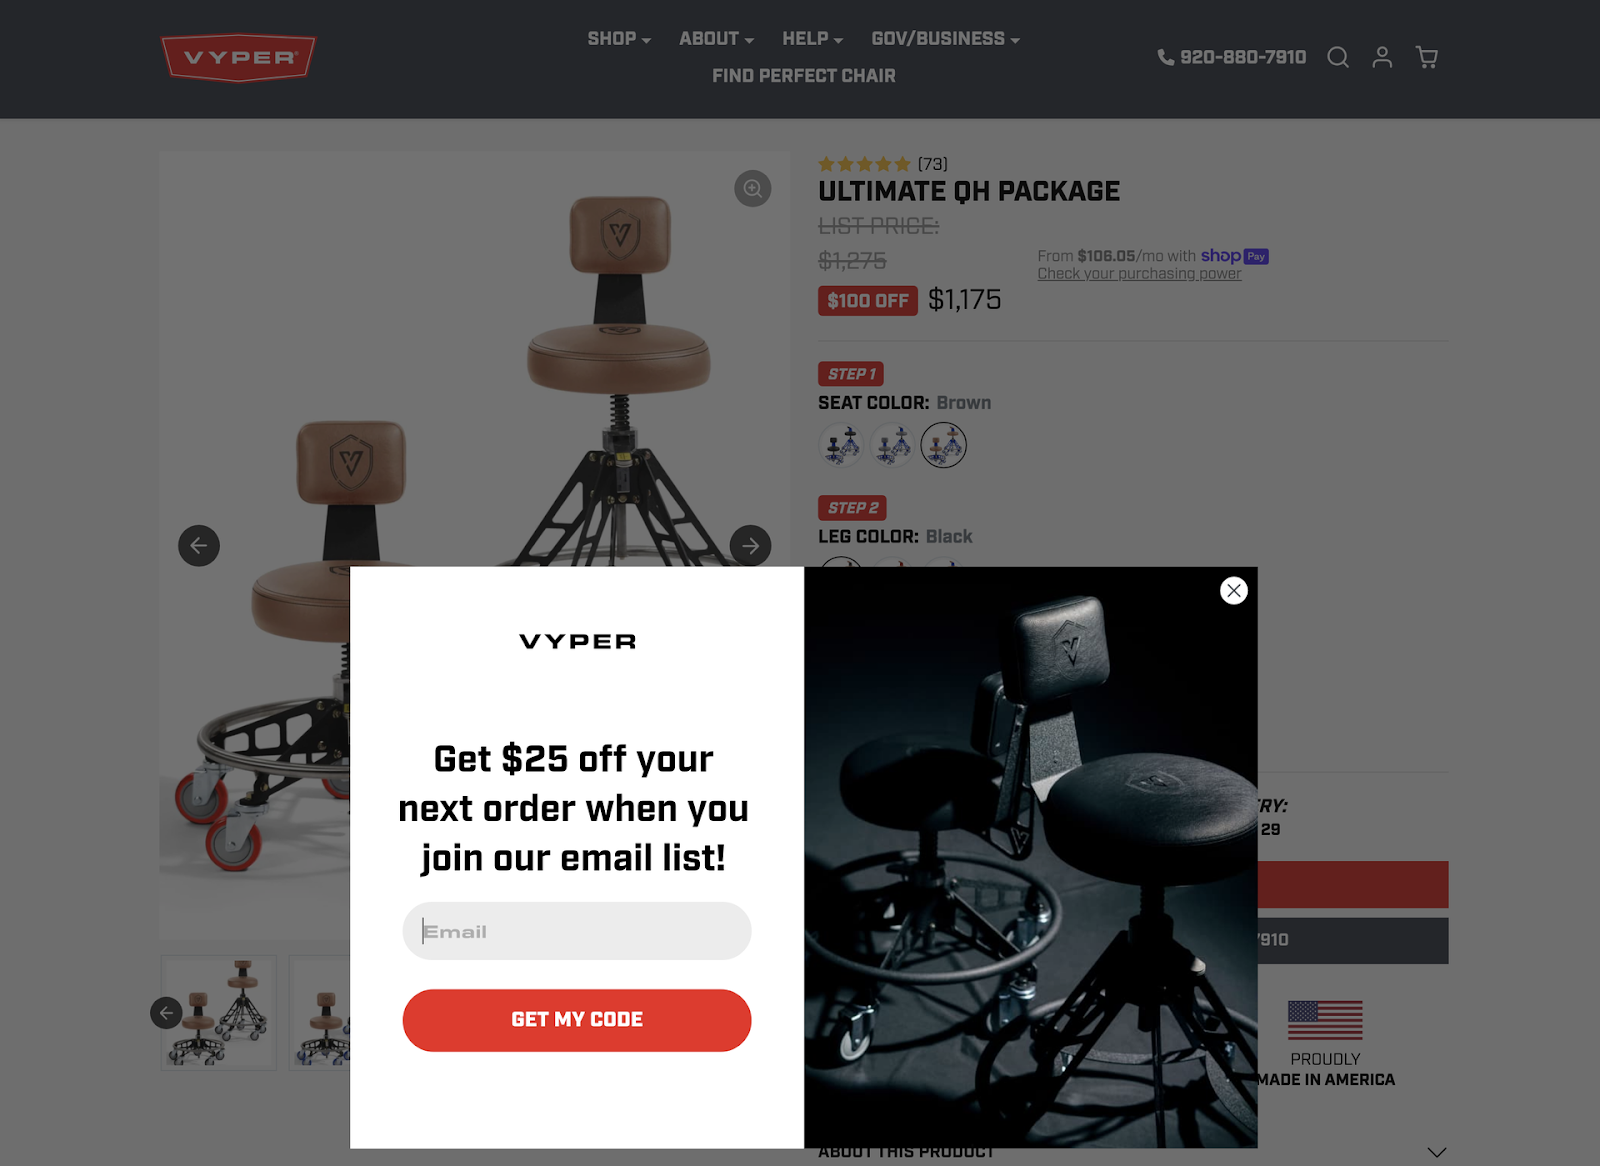 Vyper product page for the rolling chair from the ad, page shown with popup